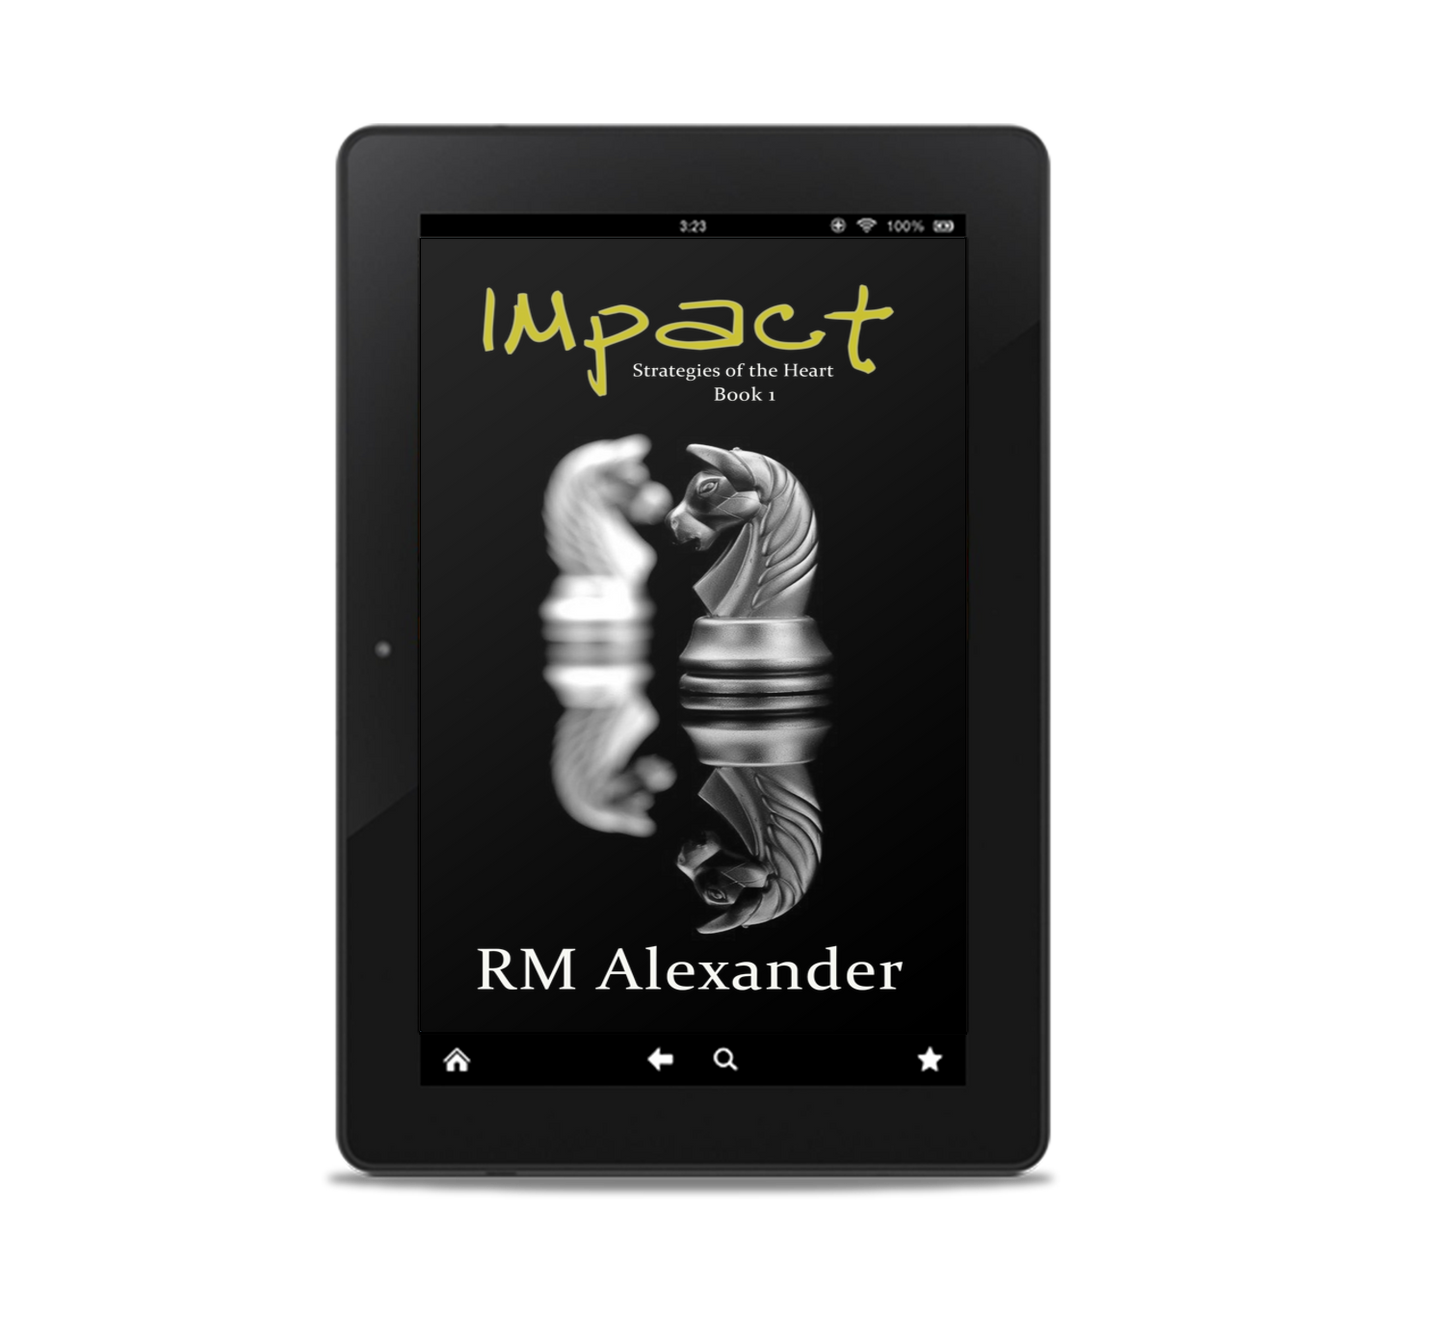 Impact (Strategies of the Heart Book 1)